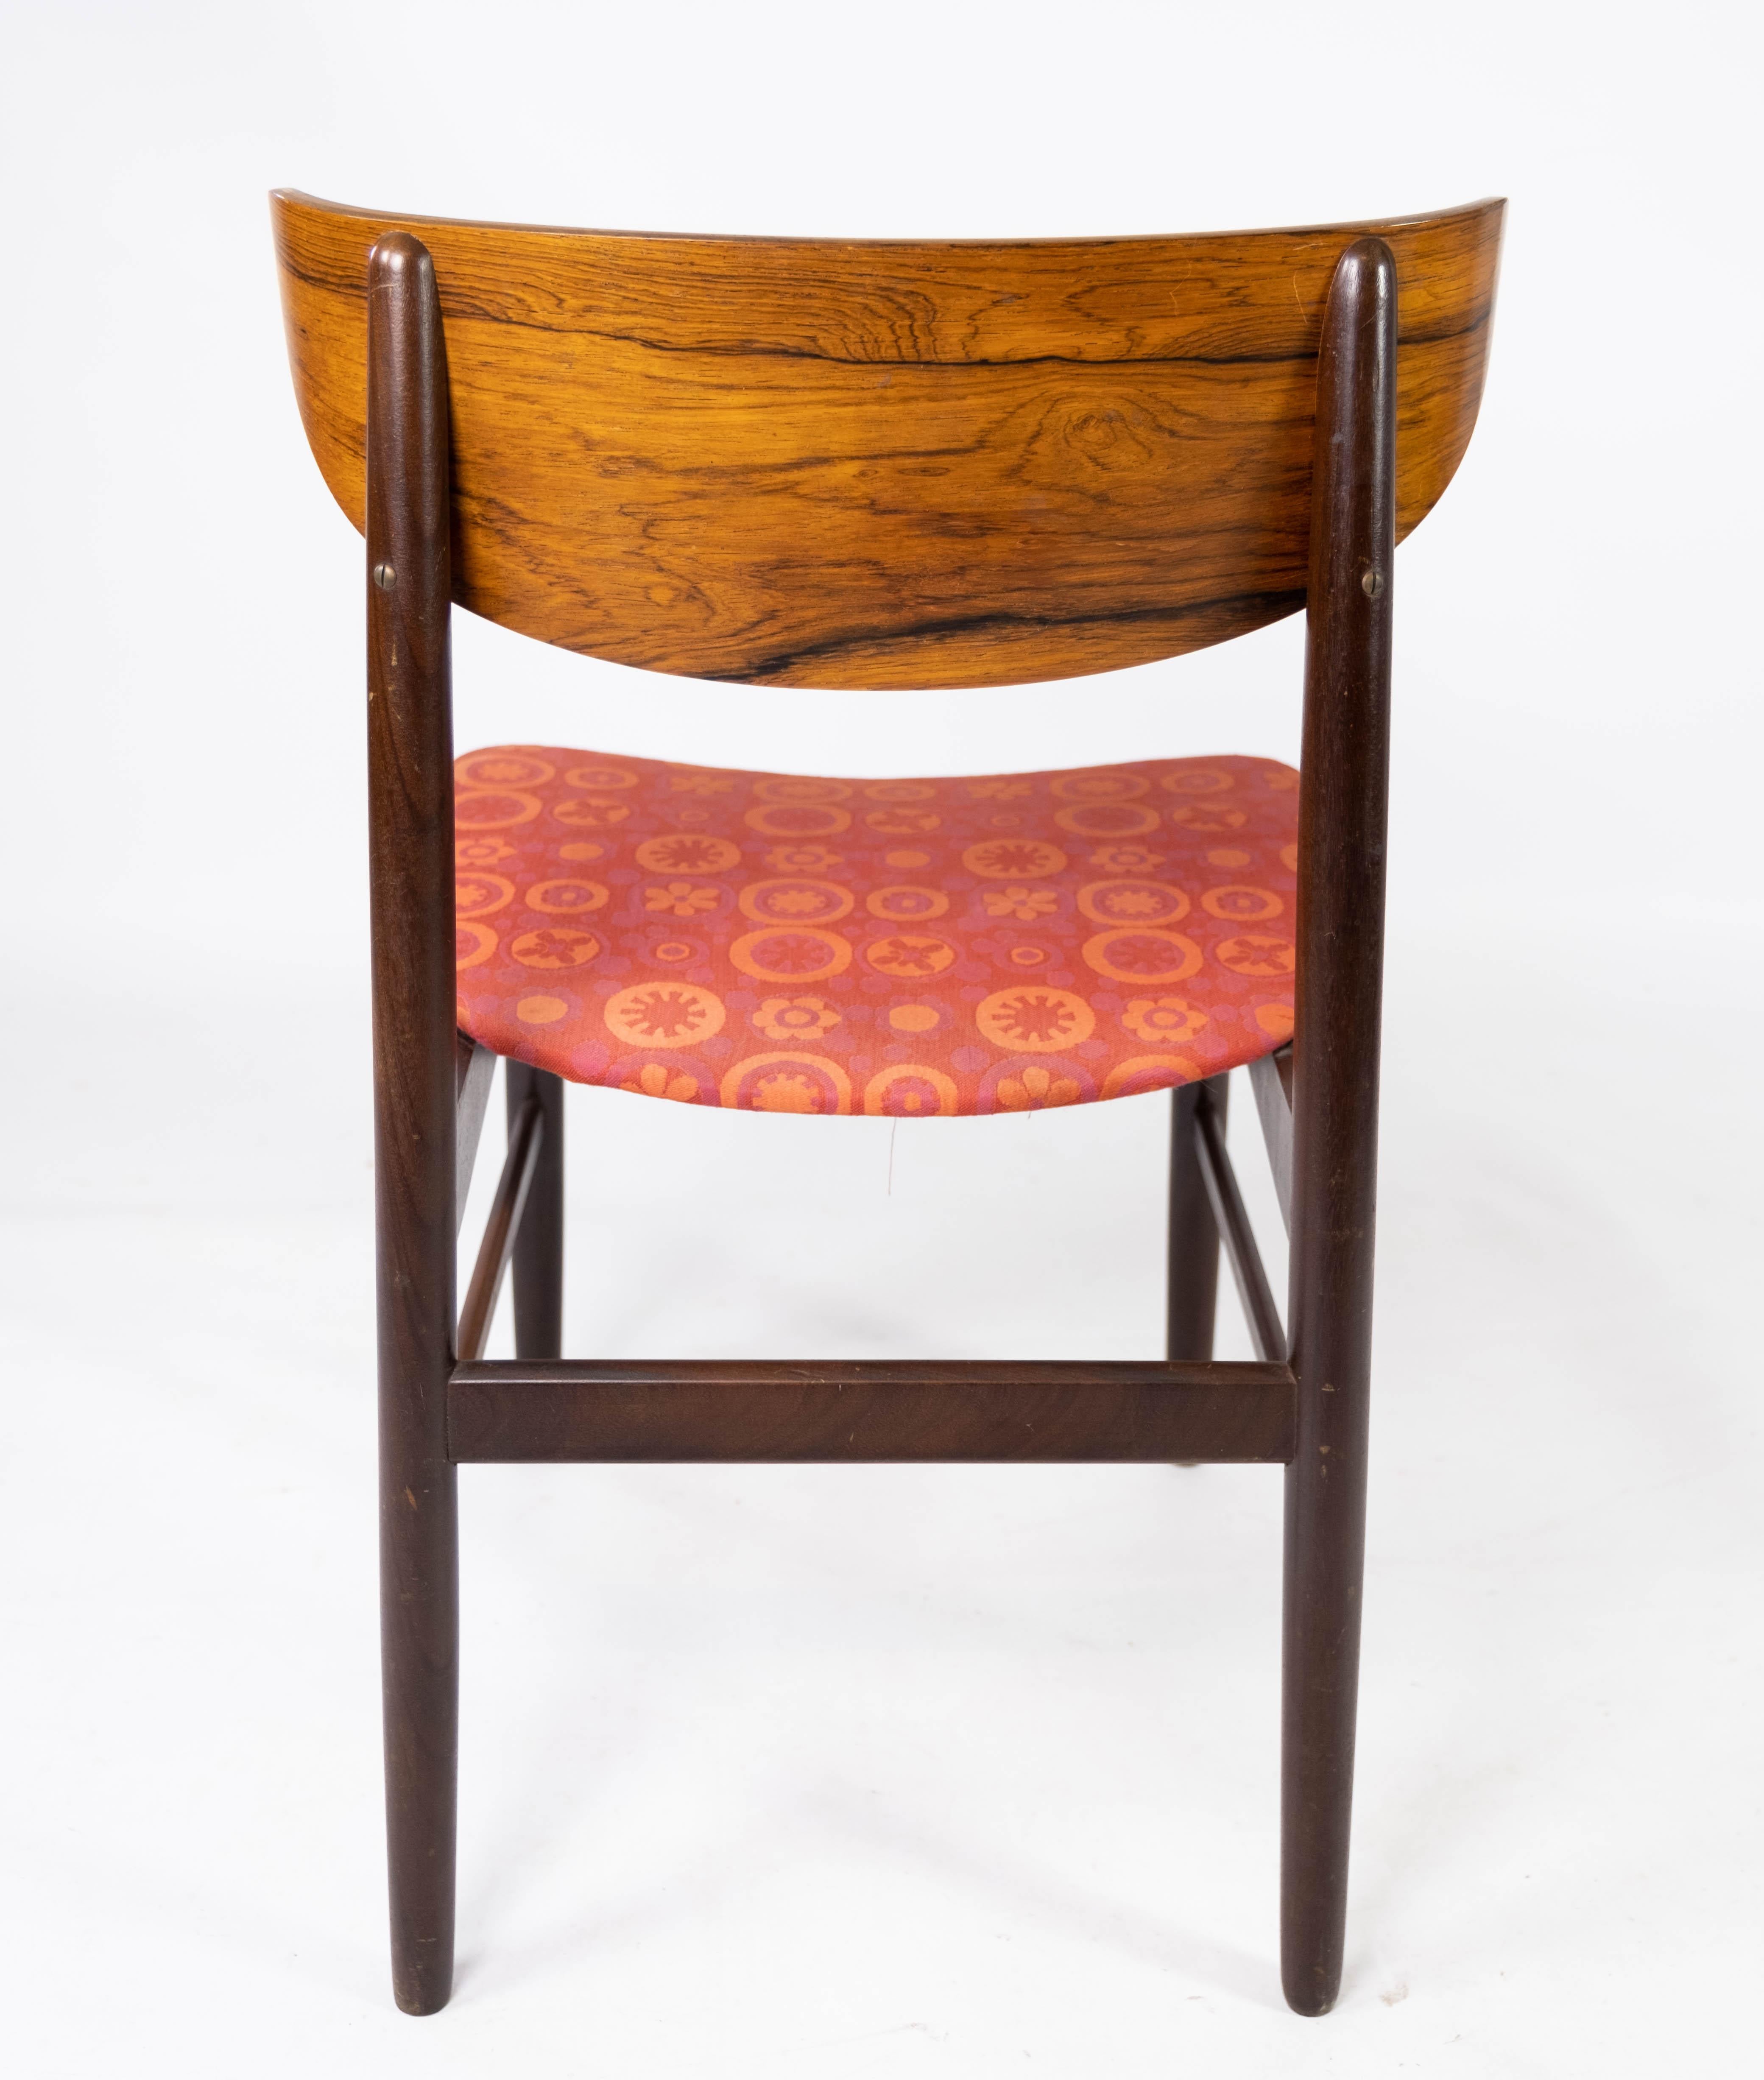 Set of Four Dining Room Chairs in Rosewood, of Danish Design, 1960s For Sale 6